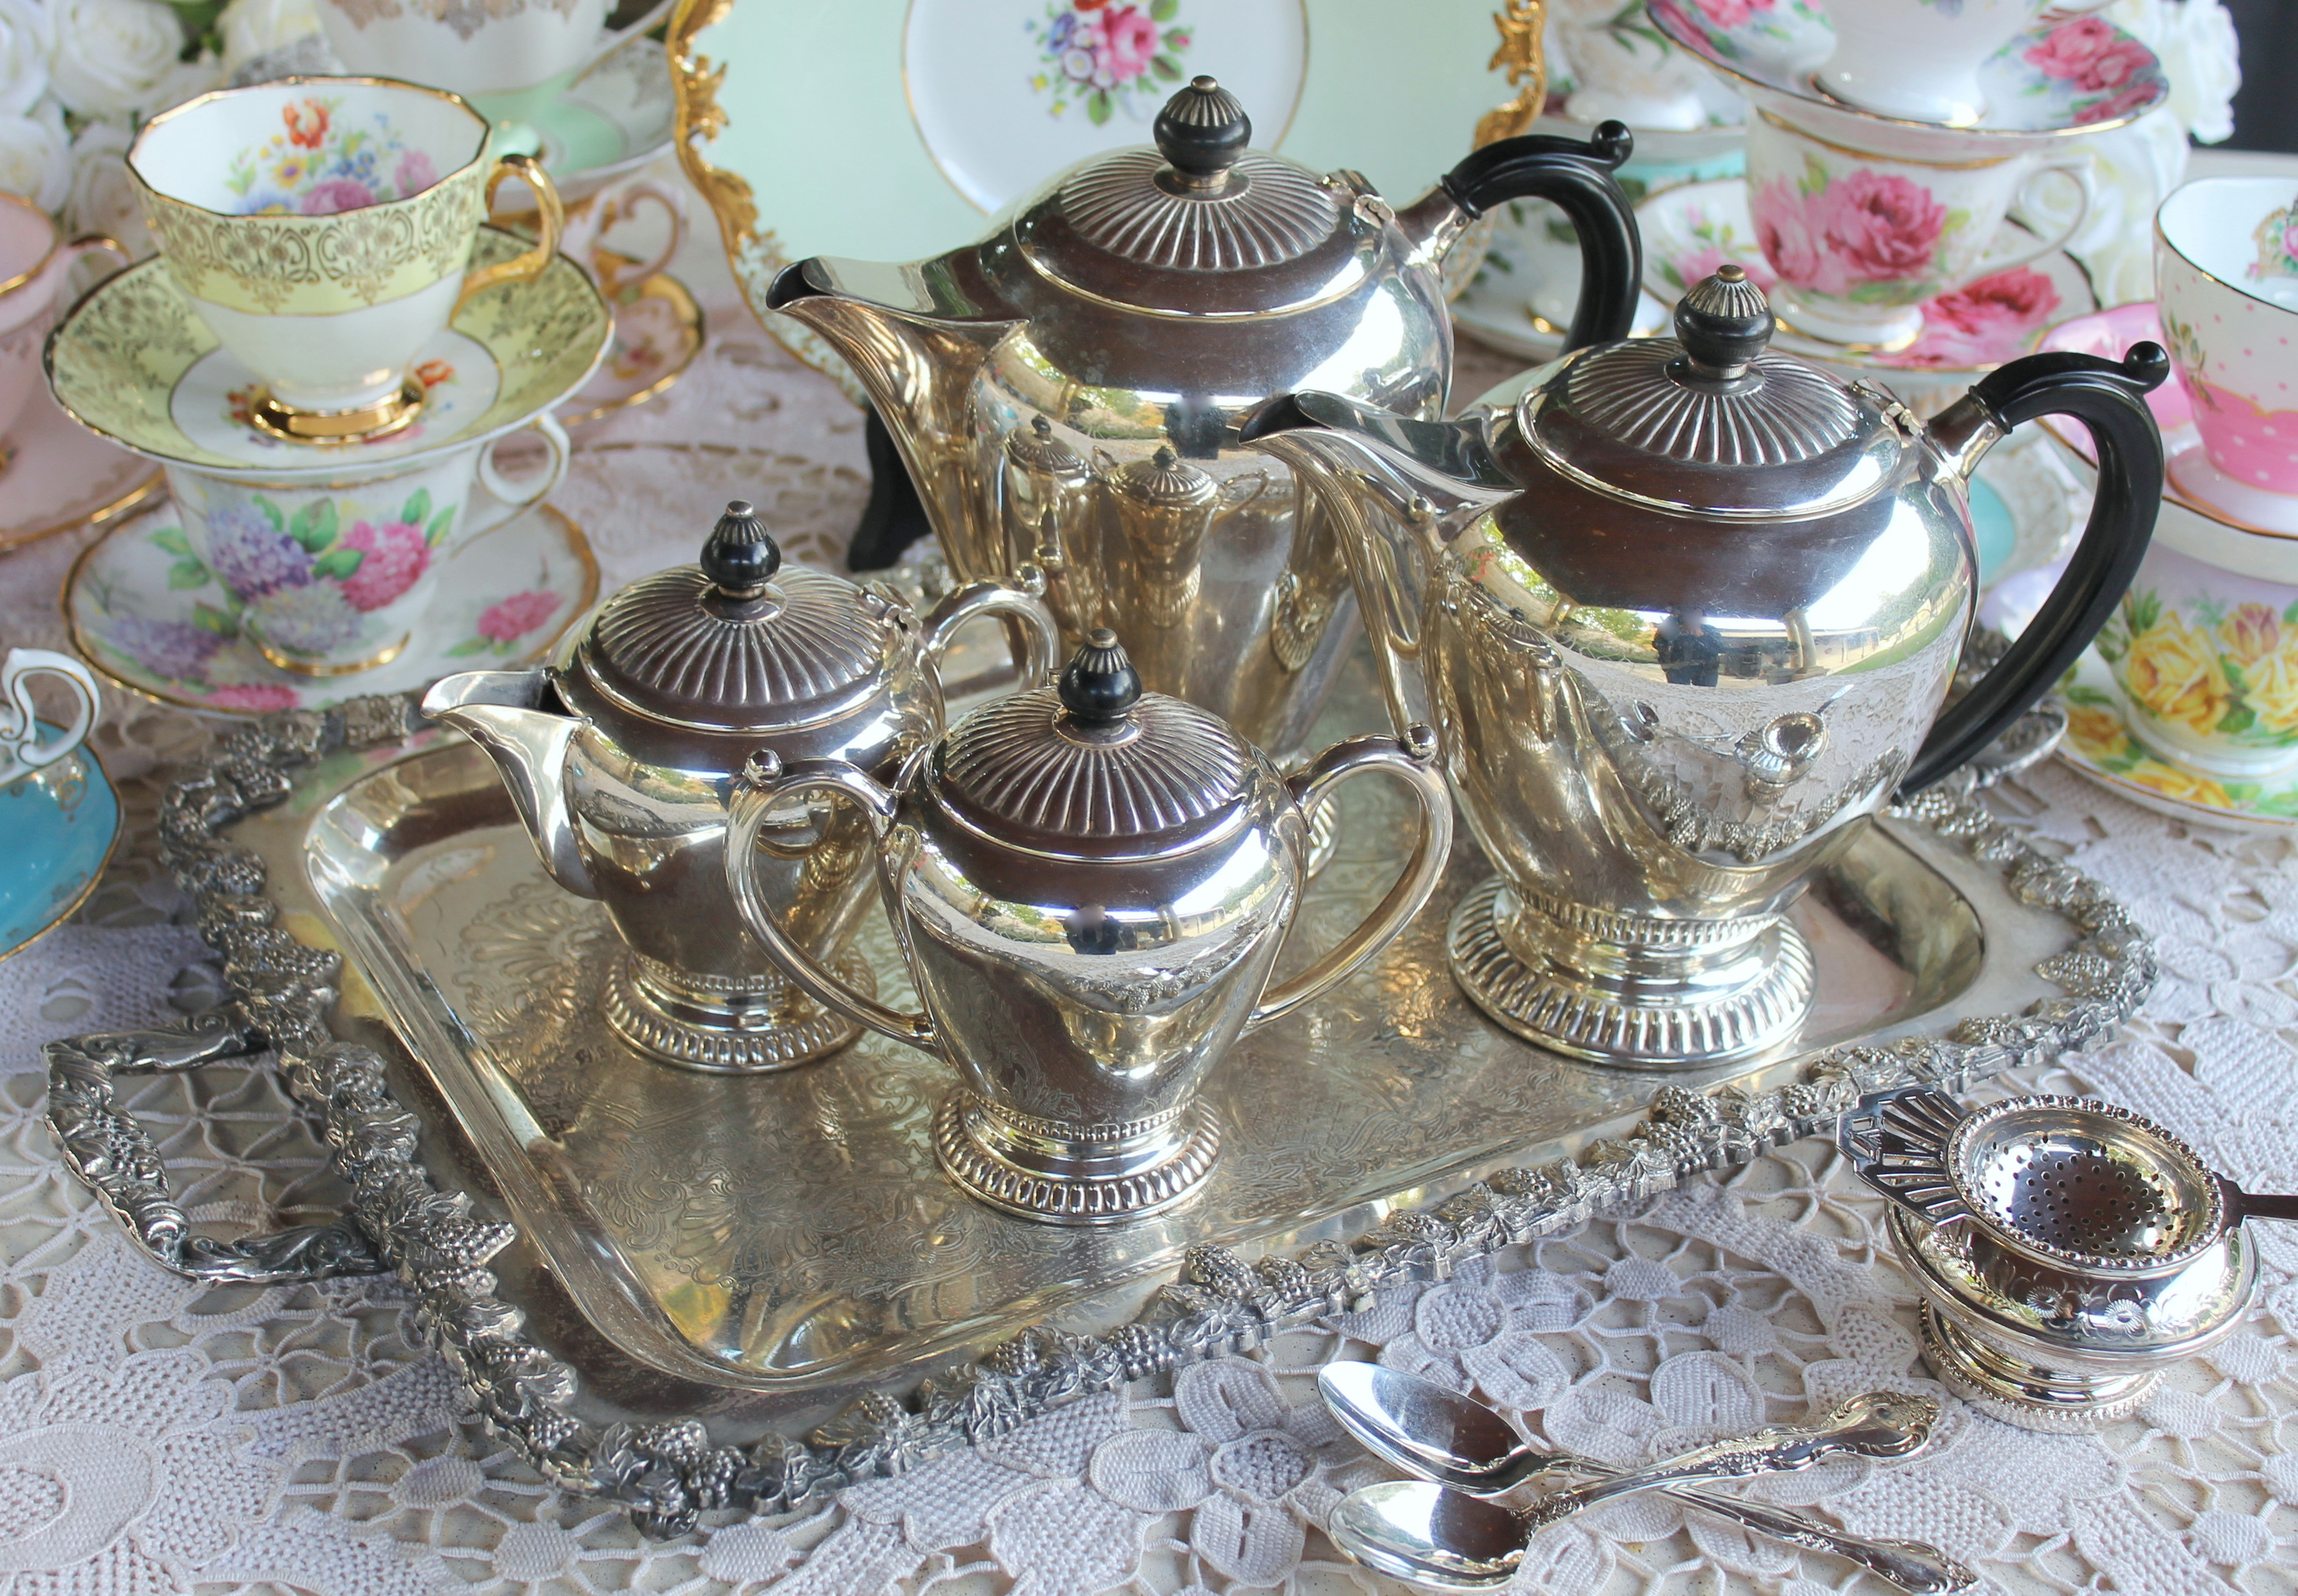 Silver tea service on a lace tablecloth surrounded by cups on saucers